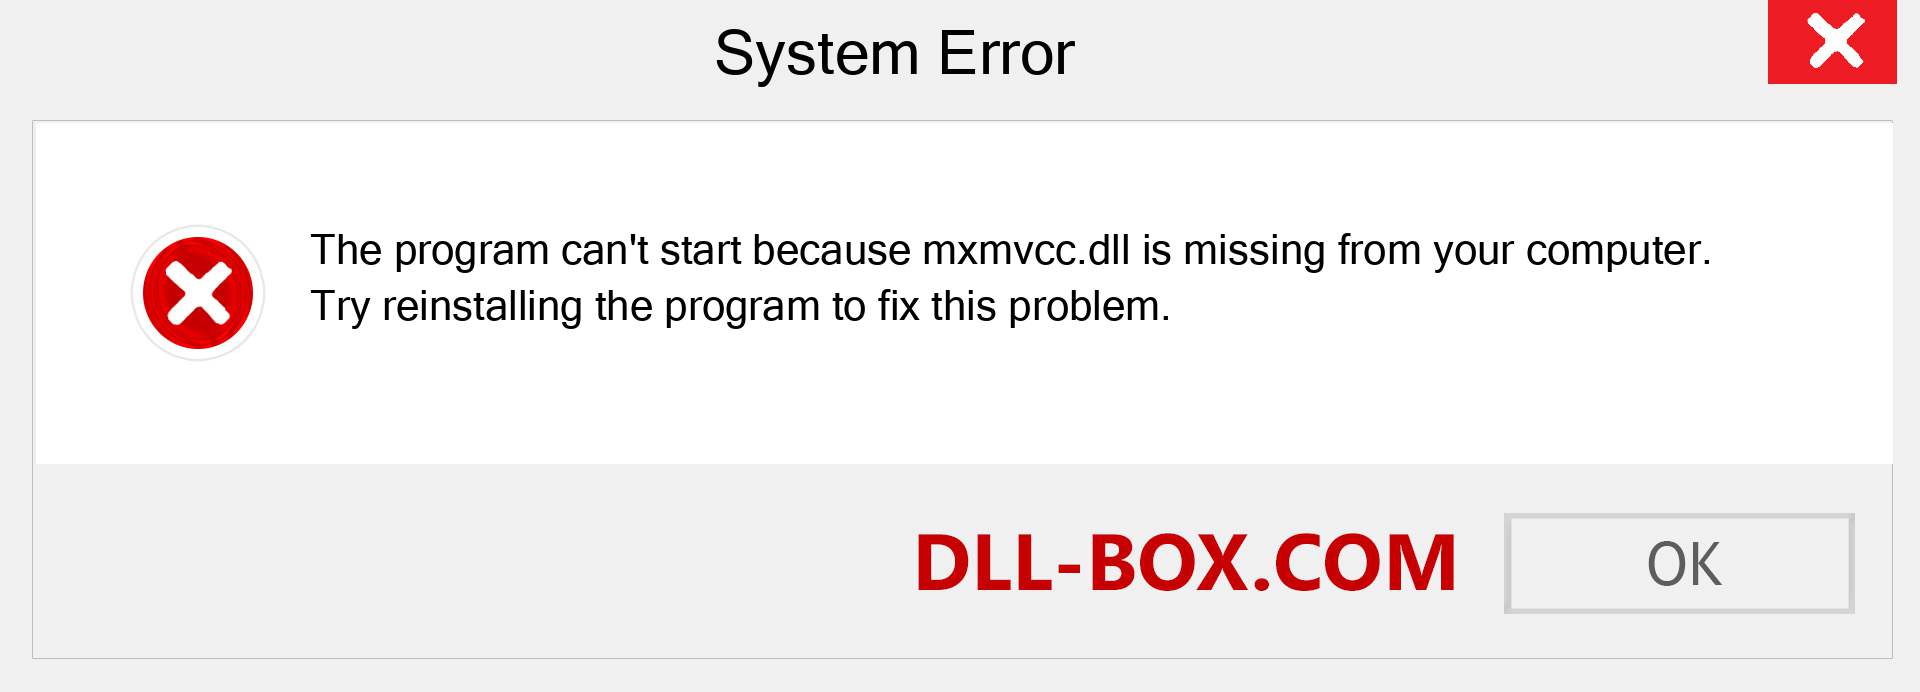  mxmvcc.dll file is missing?. Download for Windows 7, 8, 10 - Fix  mxmvcc dll Missing Error on Windows, photos, images